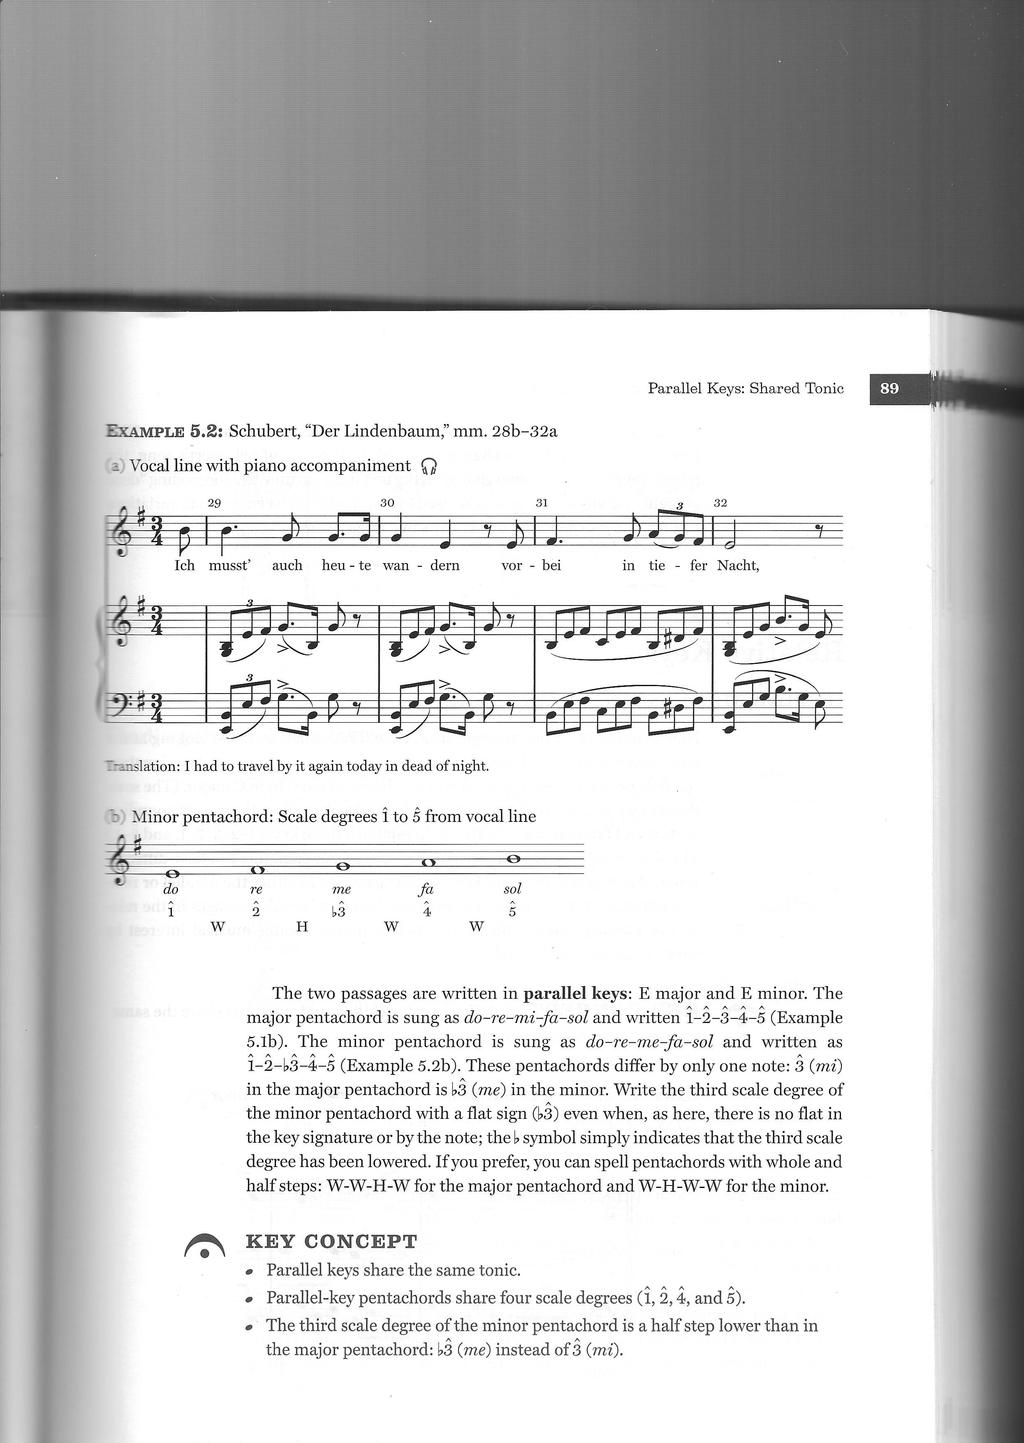 The two passages are written in parallel keys - E major and e minor.